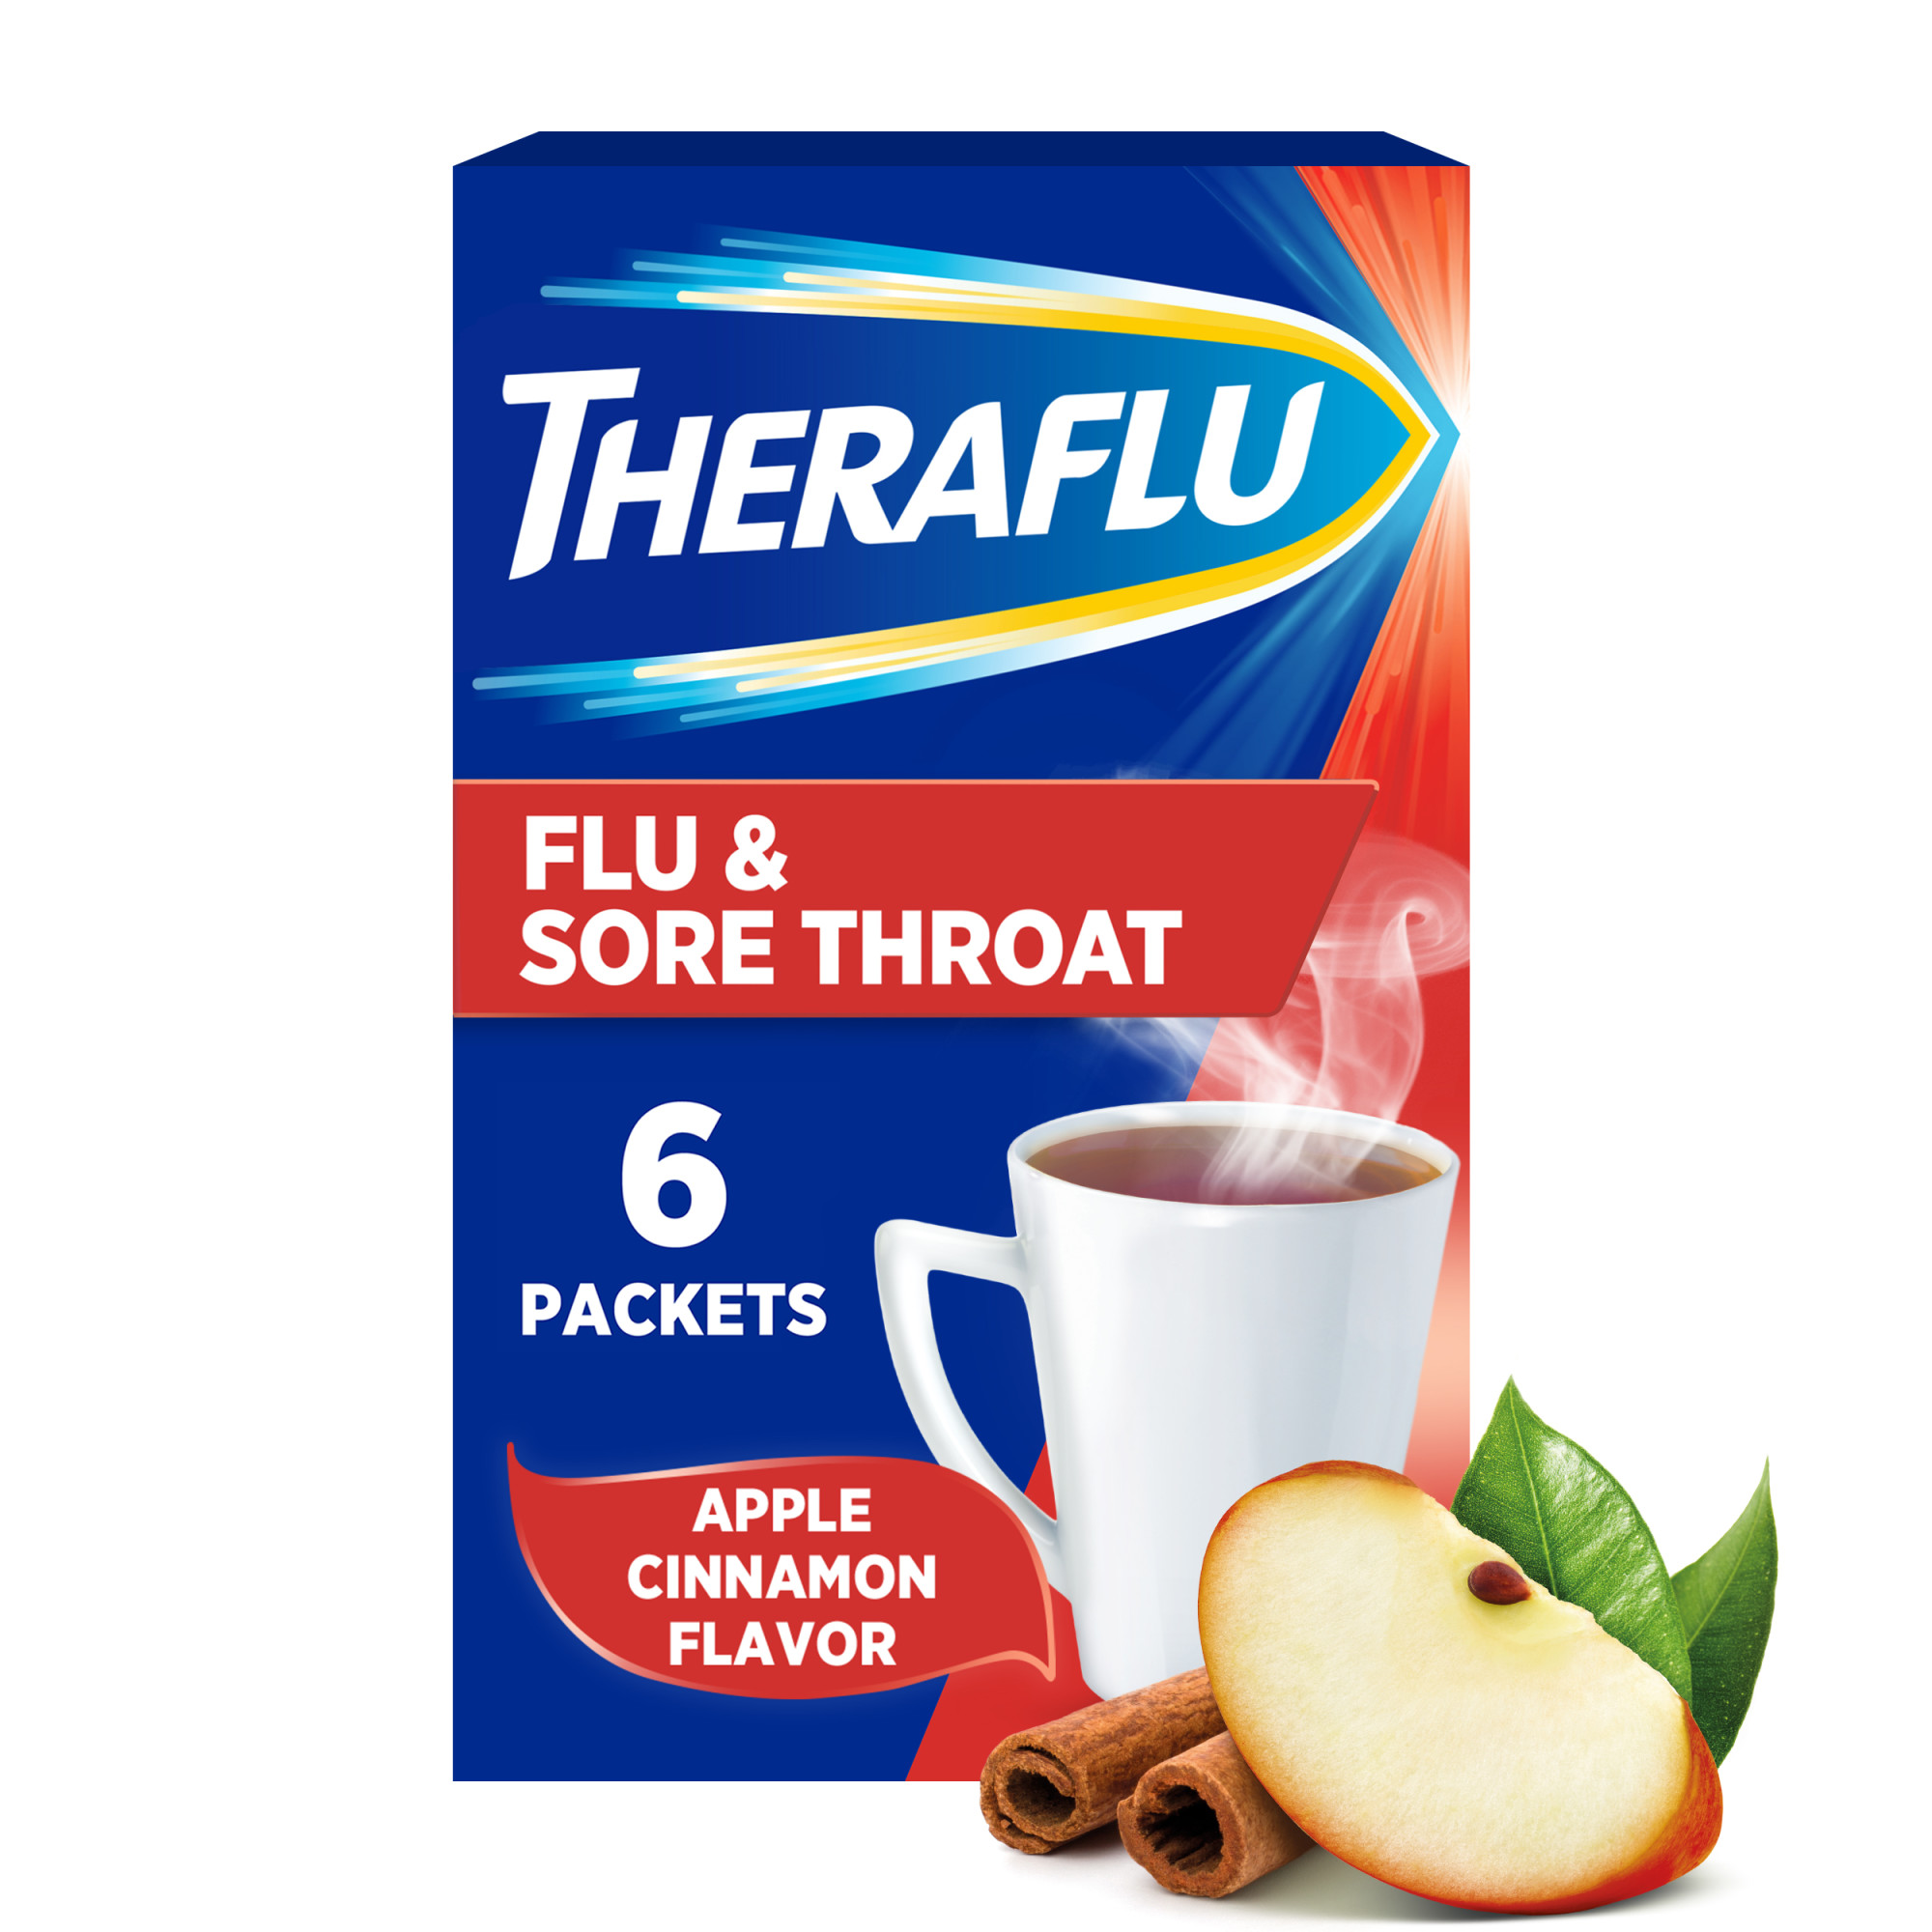 Theraflu Cold, Flu and Sore Throat Relief Powder, Apple Cinnamon, 6 Packets - image 1 of 9